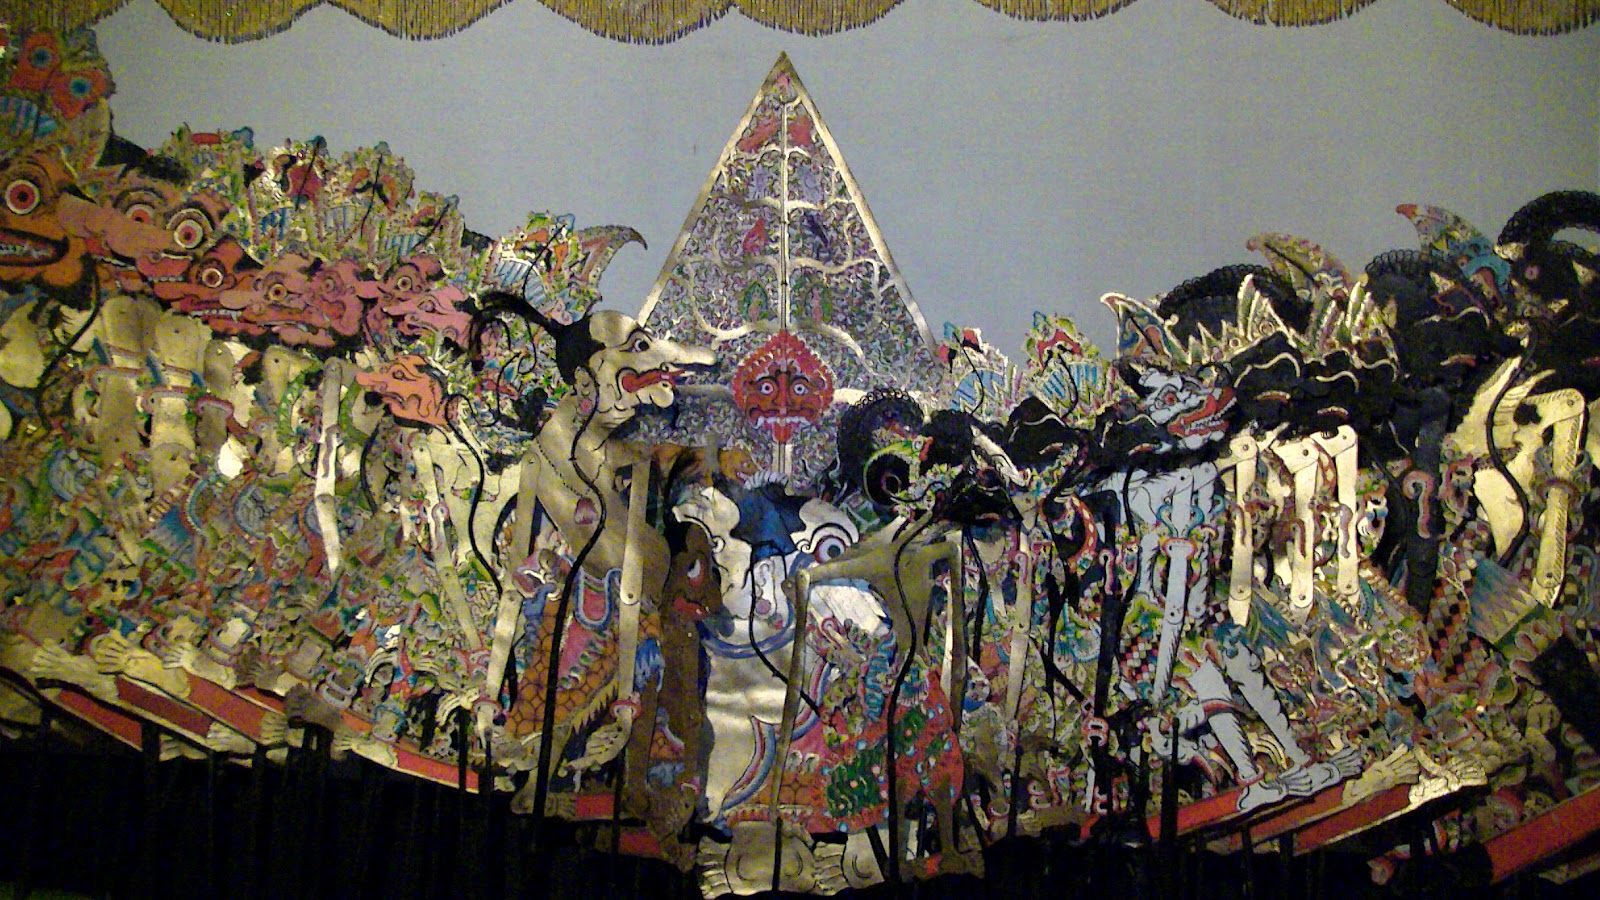  WAYANG KULIT  something unique in the culture of Java